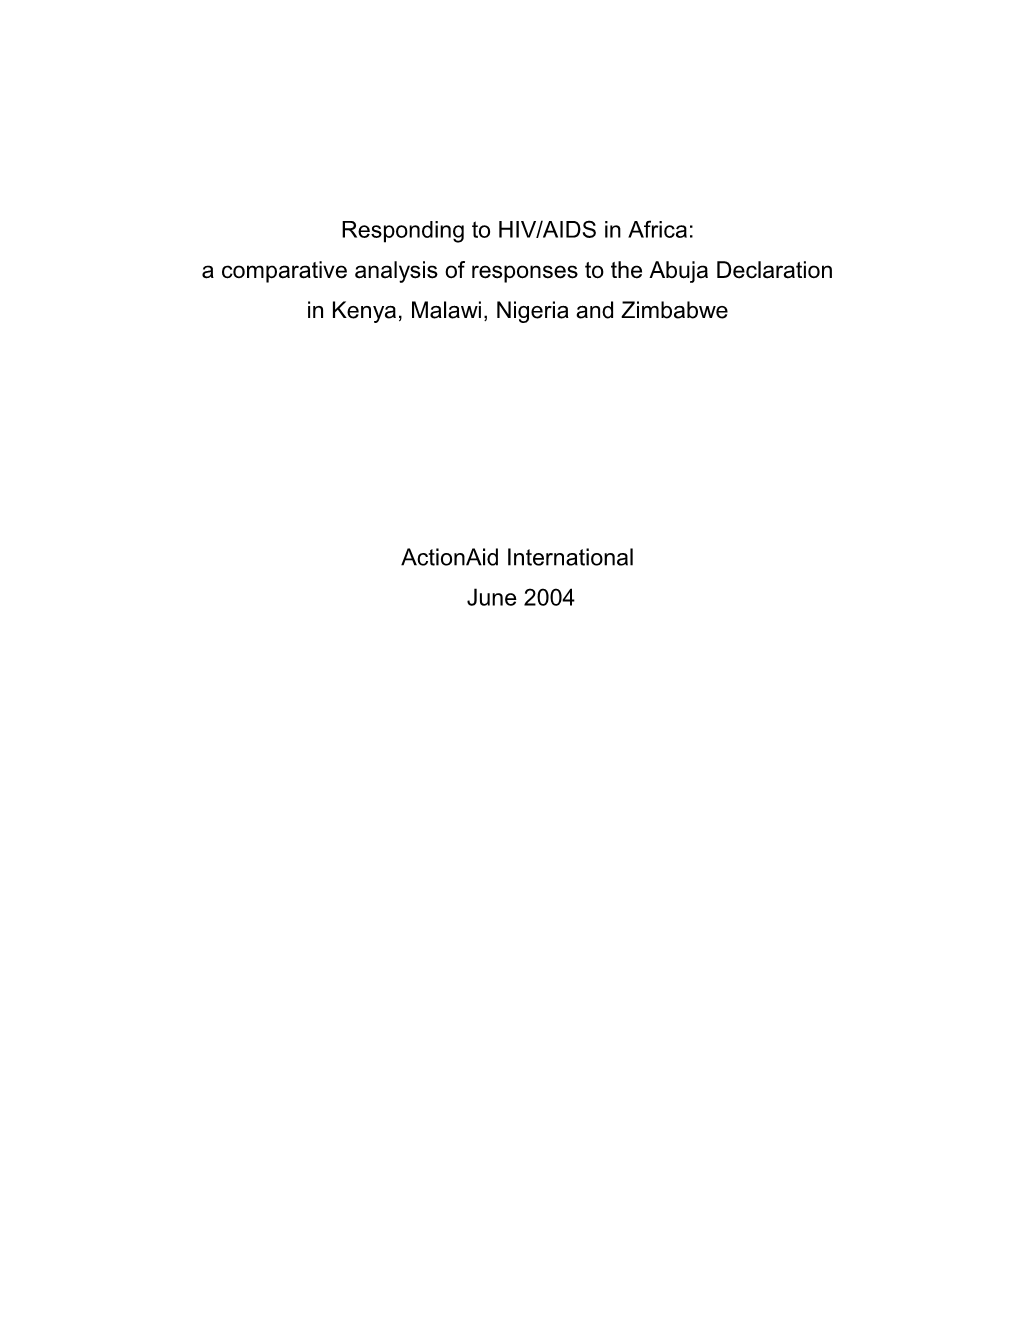 Multi-Country Report on Monitoring Commitments Made in the Abuja Declaration on HIV/AIDS